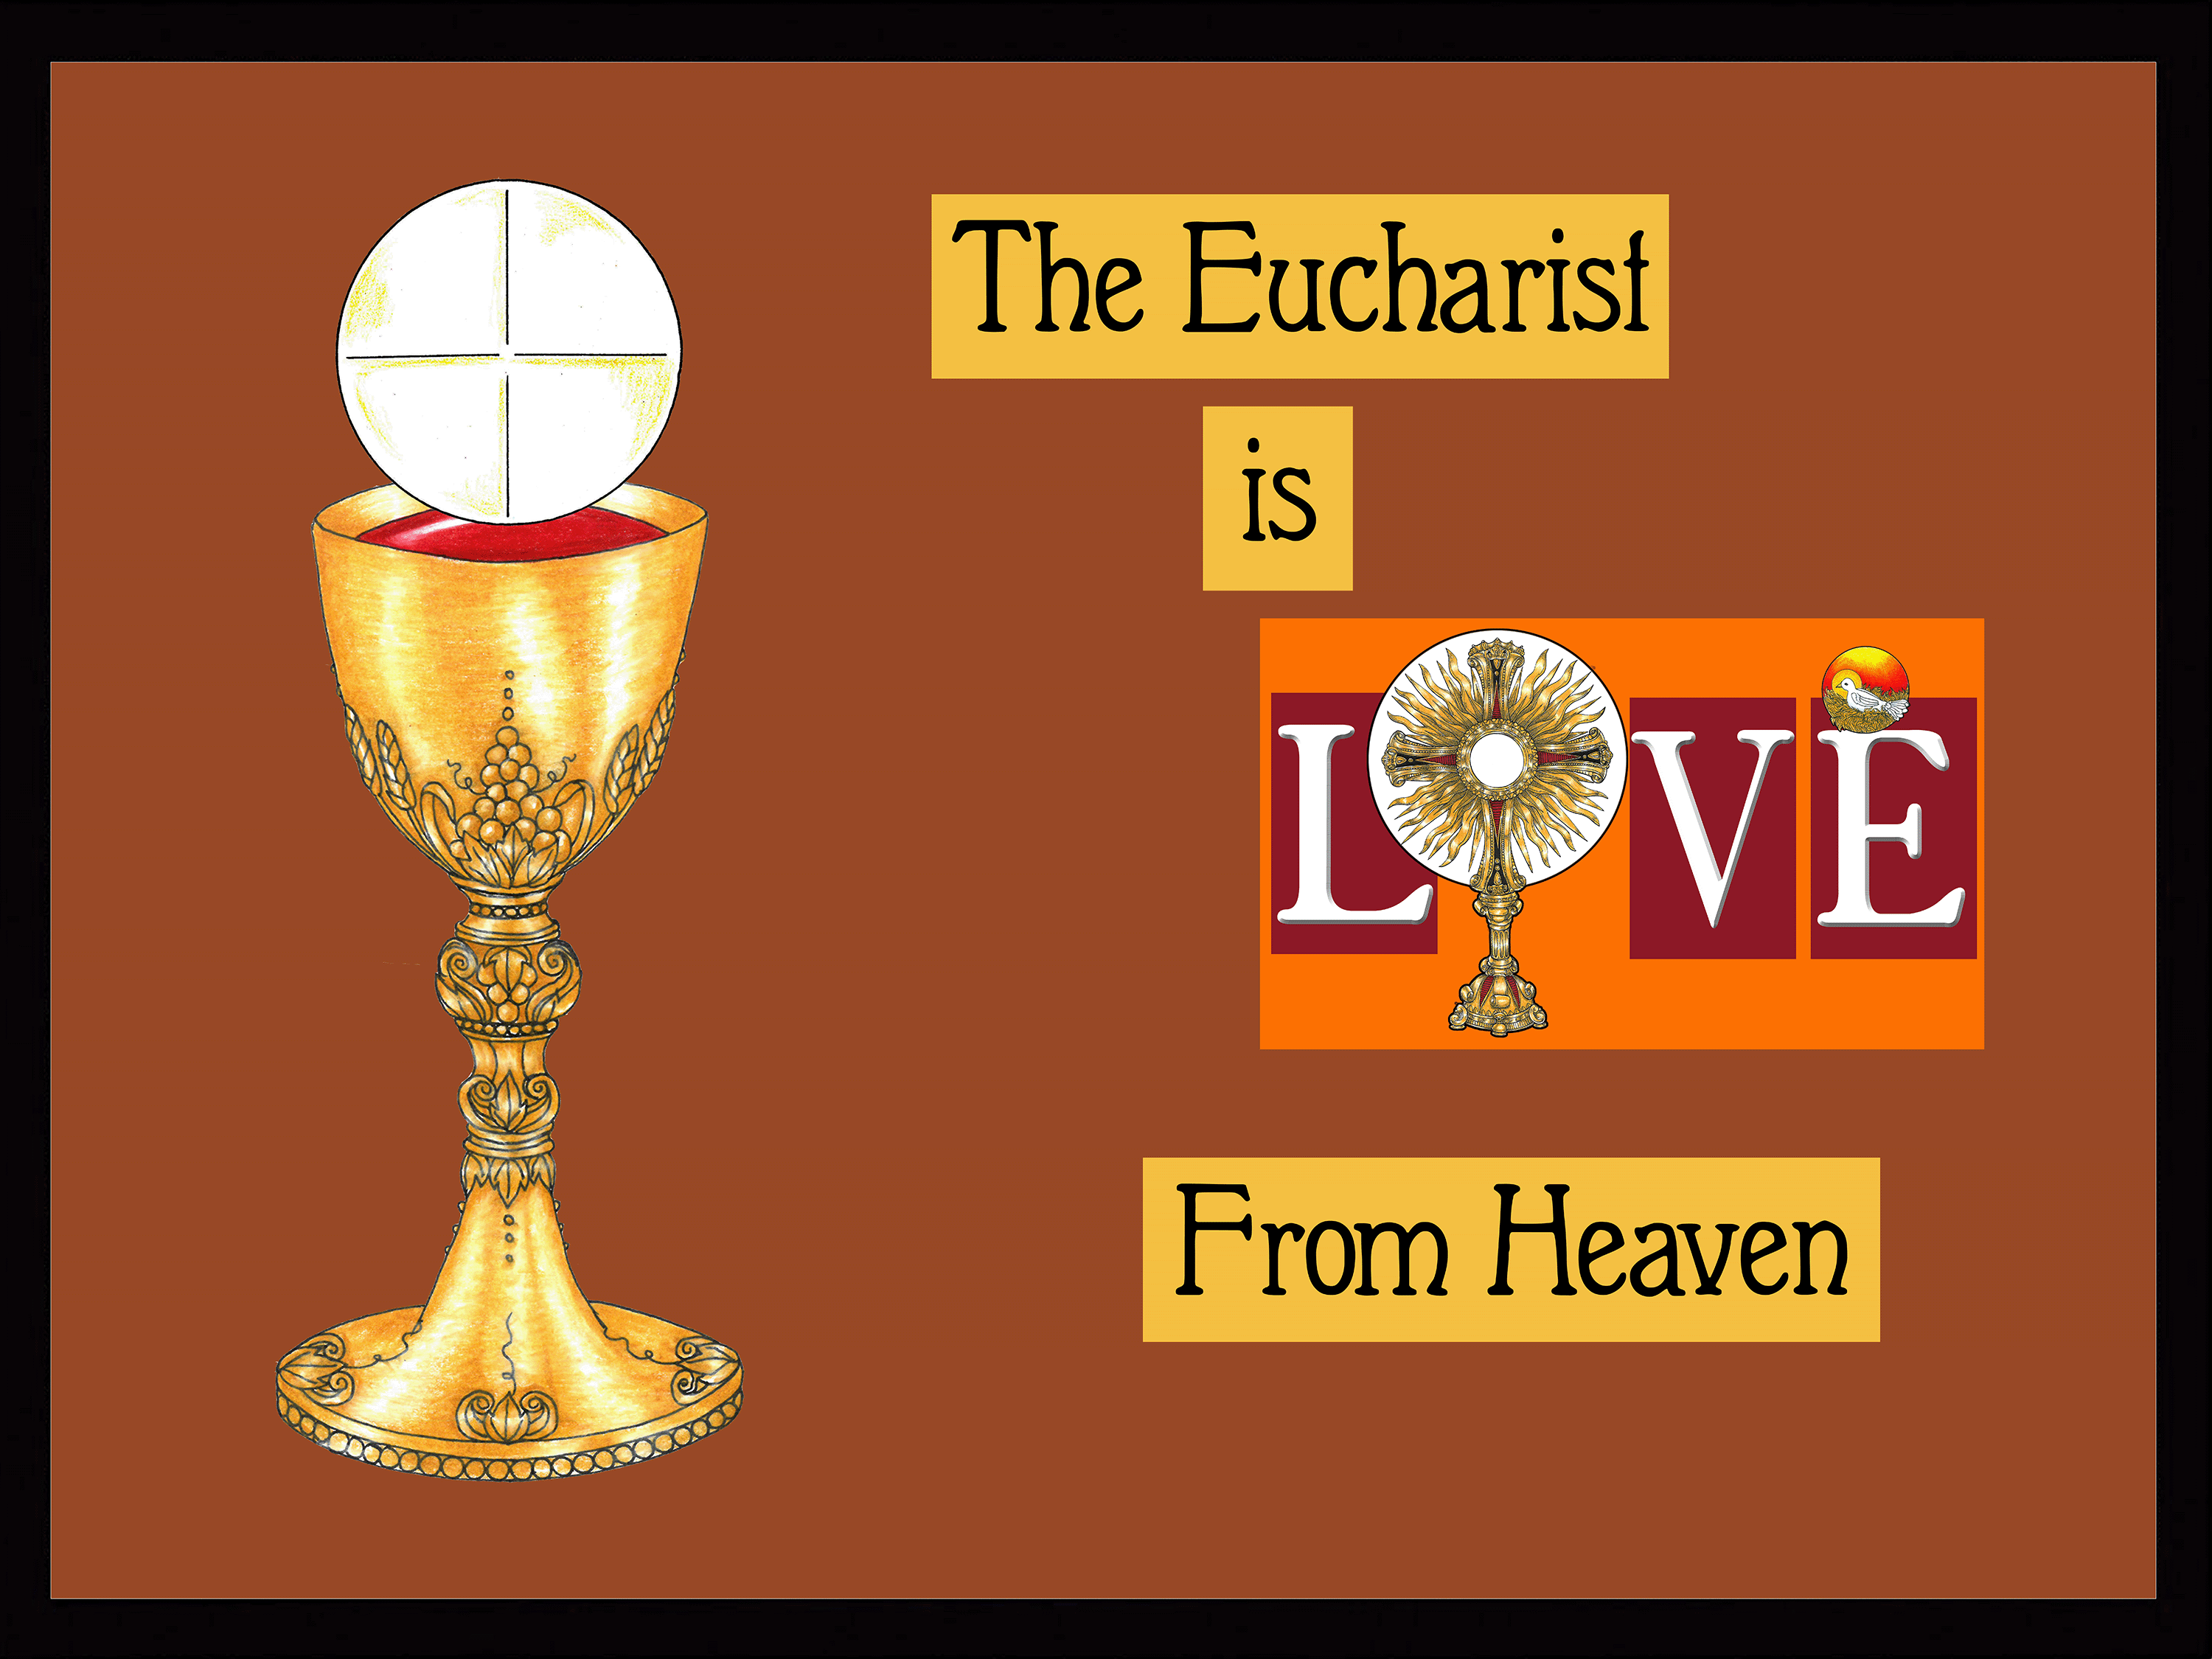 Holy Sparks - The Eucharist is Love